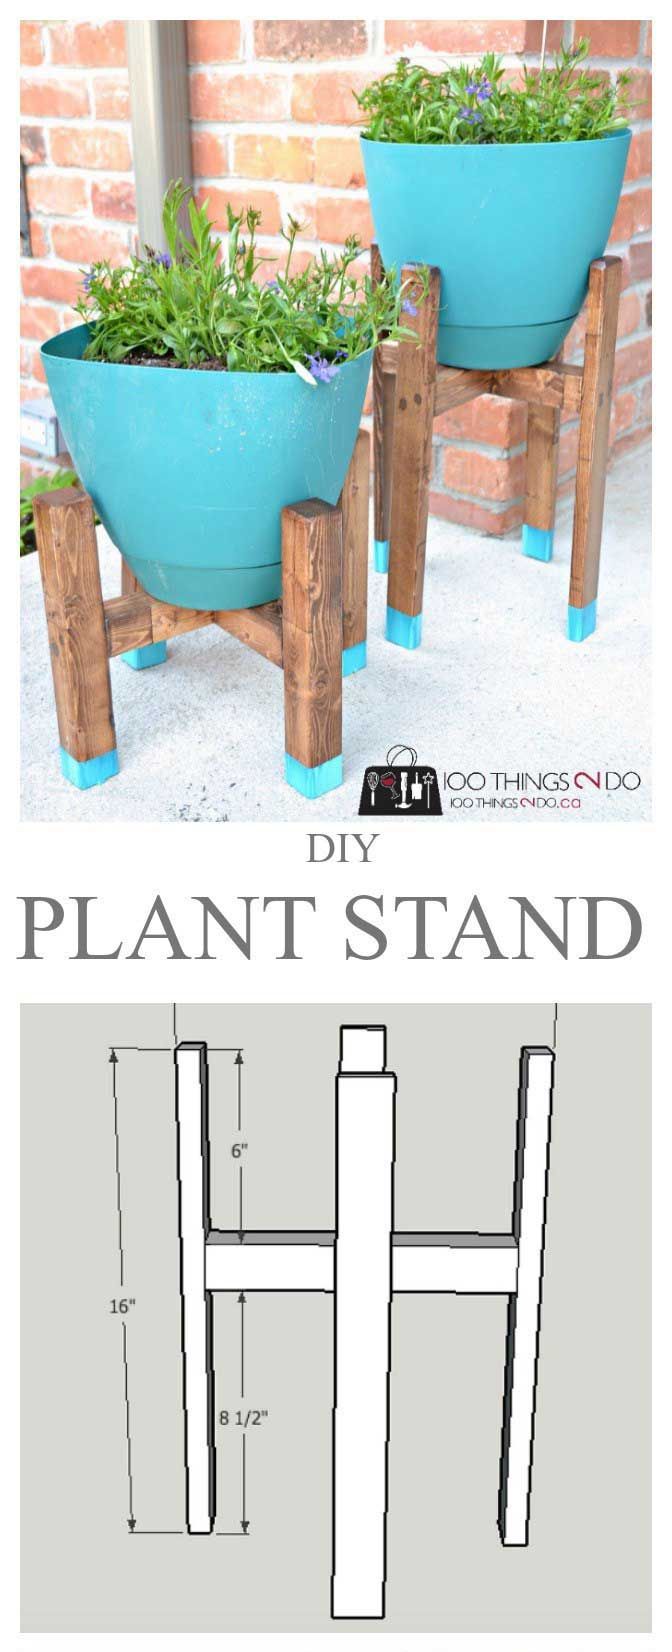 20 Insanely Cool DIY Yard and Patio Furniture – Patio Furniture – Ideas of Patio…